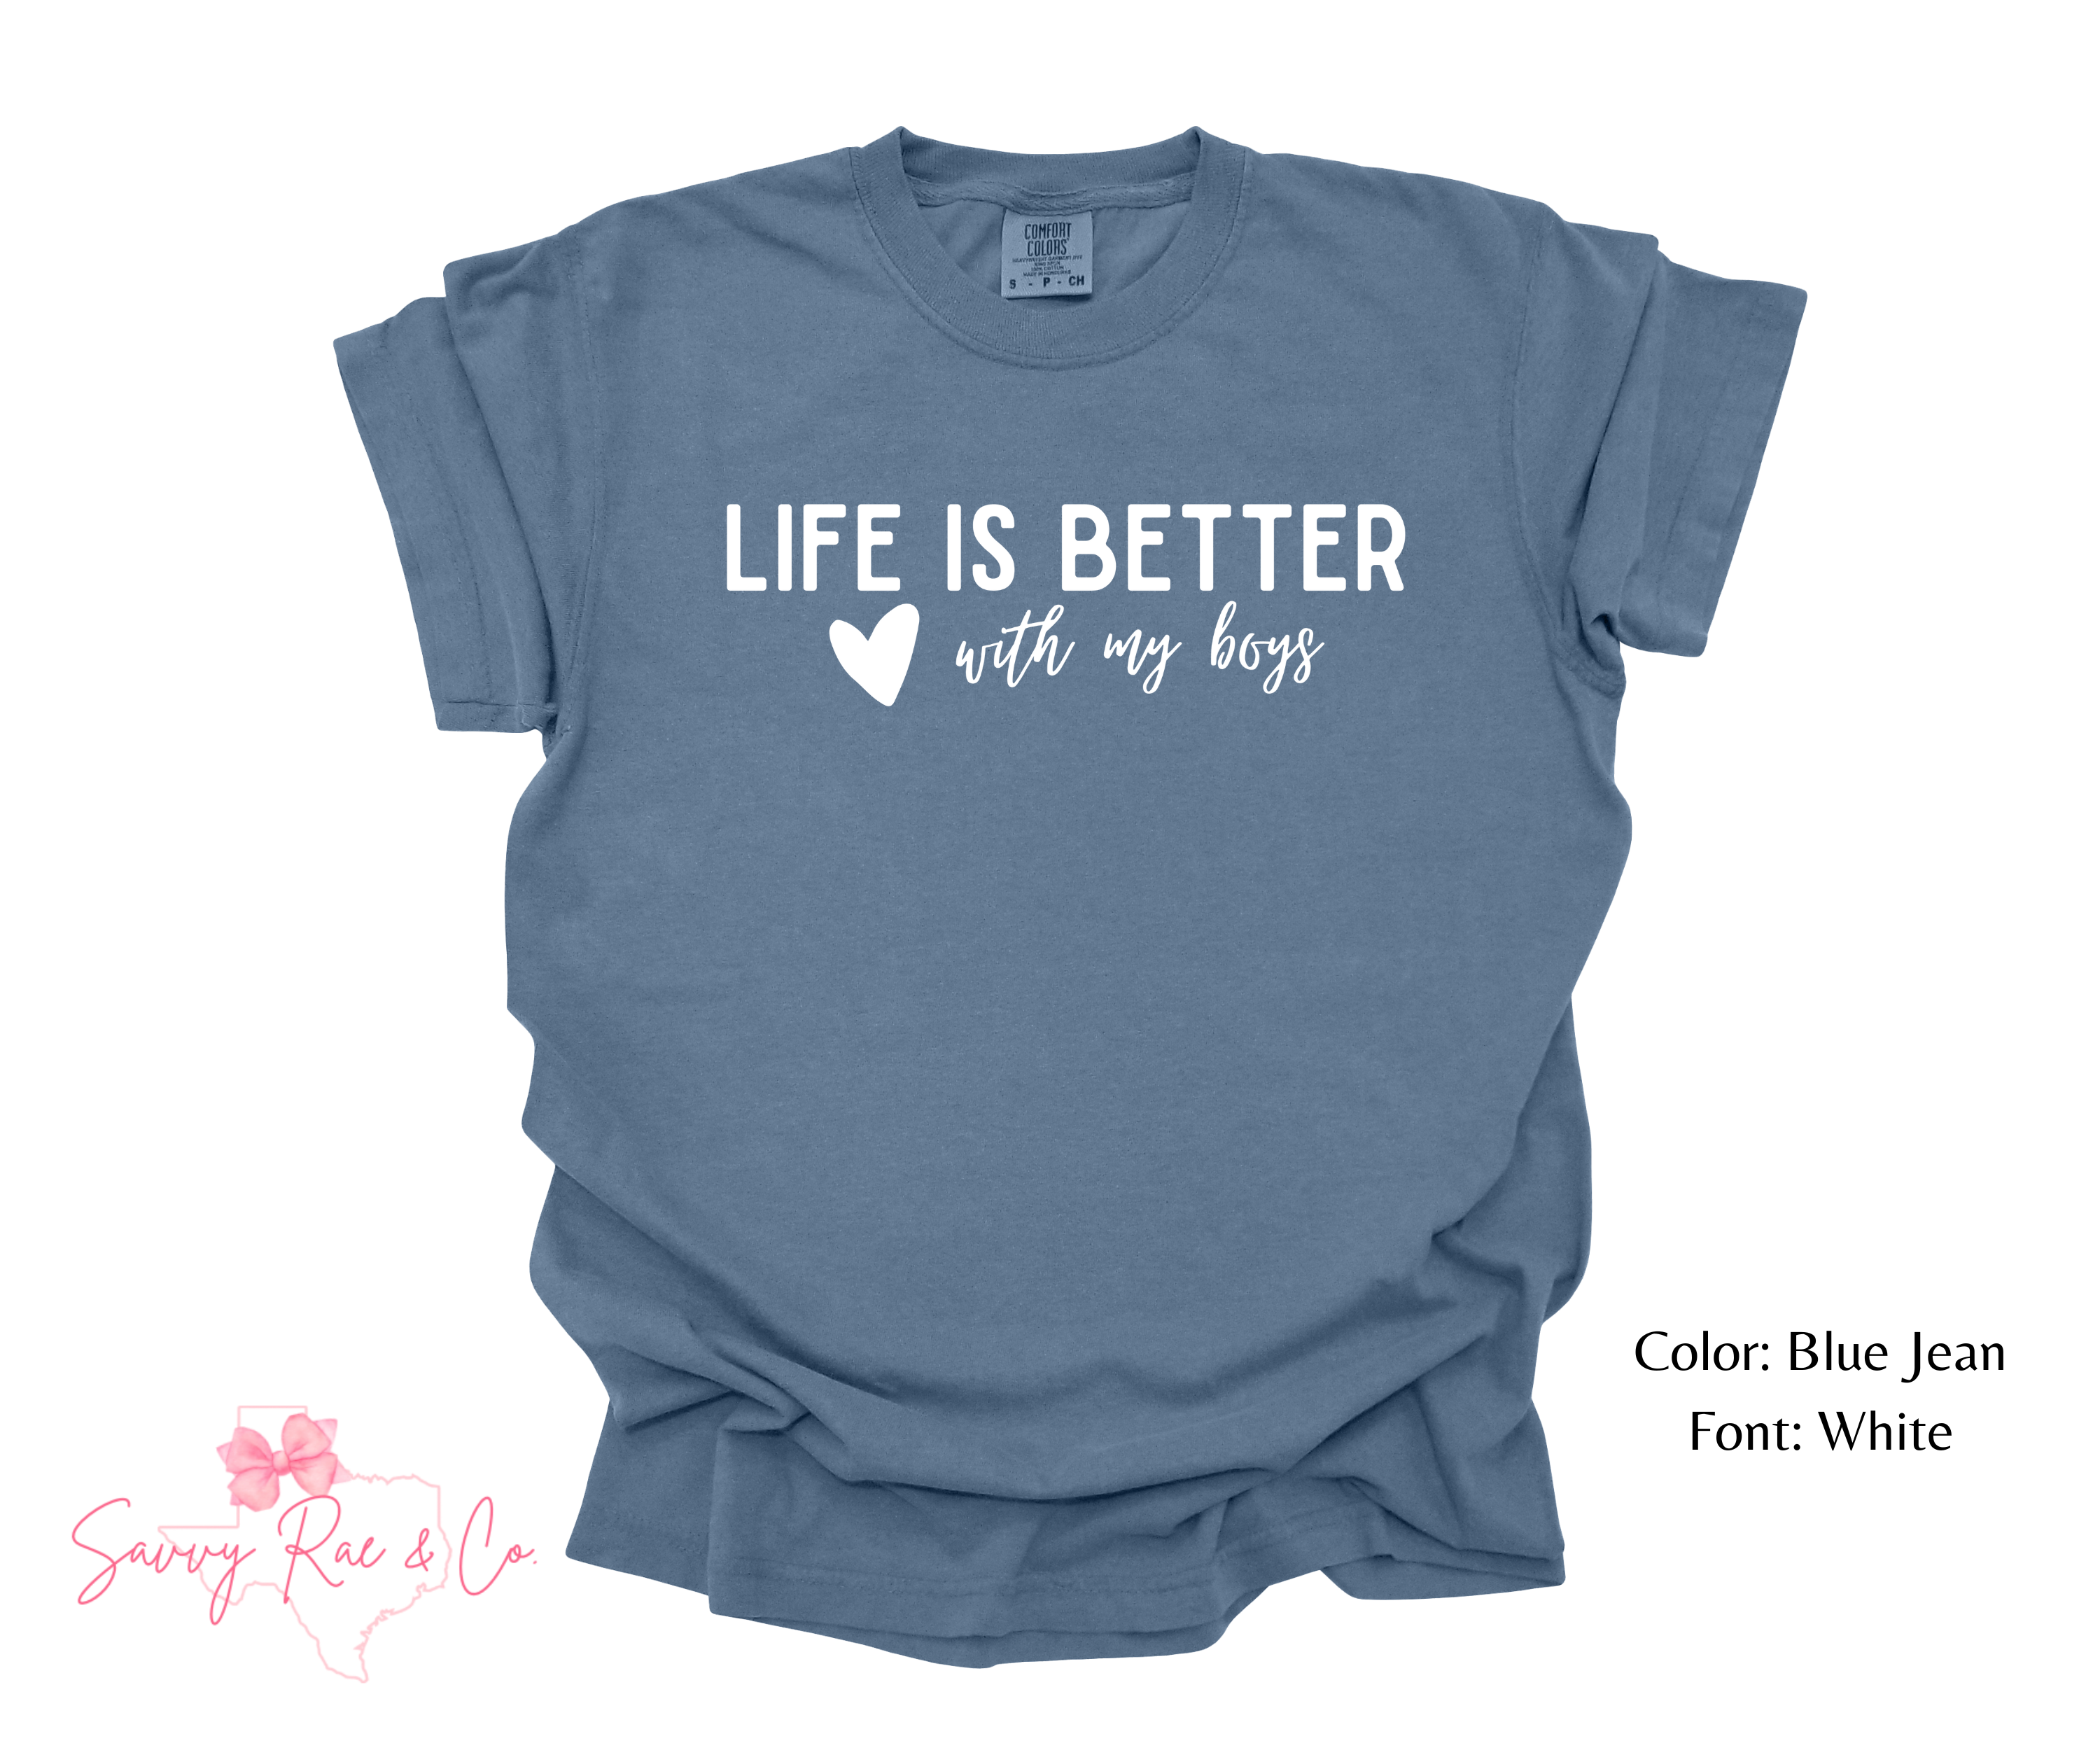 Life is Better Comfort Colors Shirts